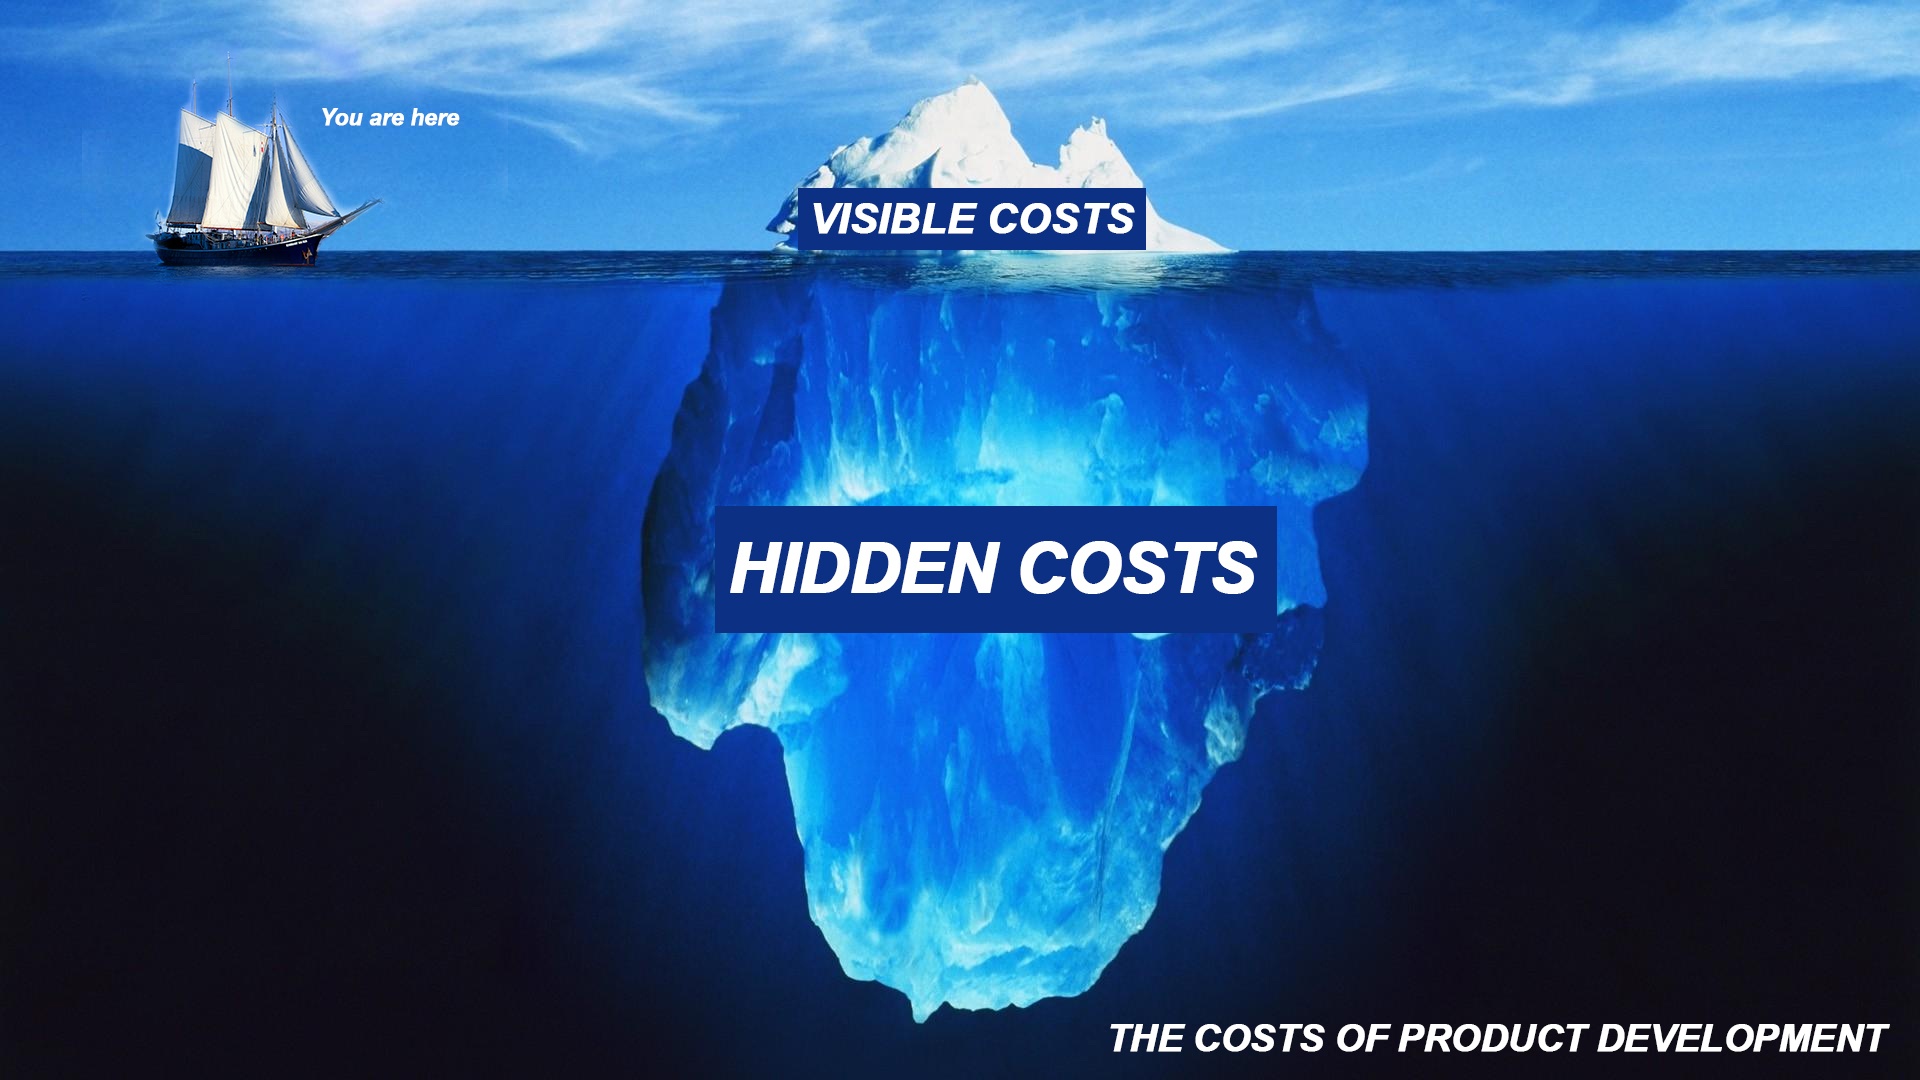 The Costs of Product Development